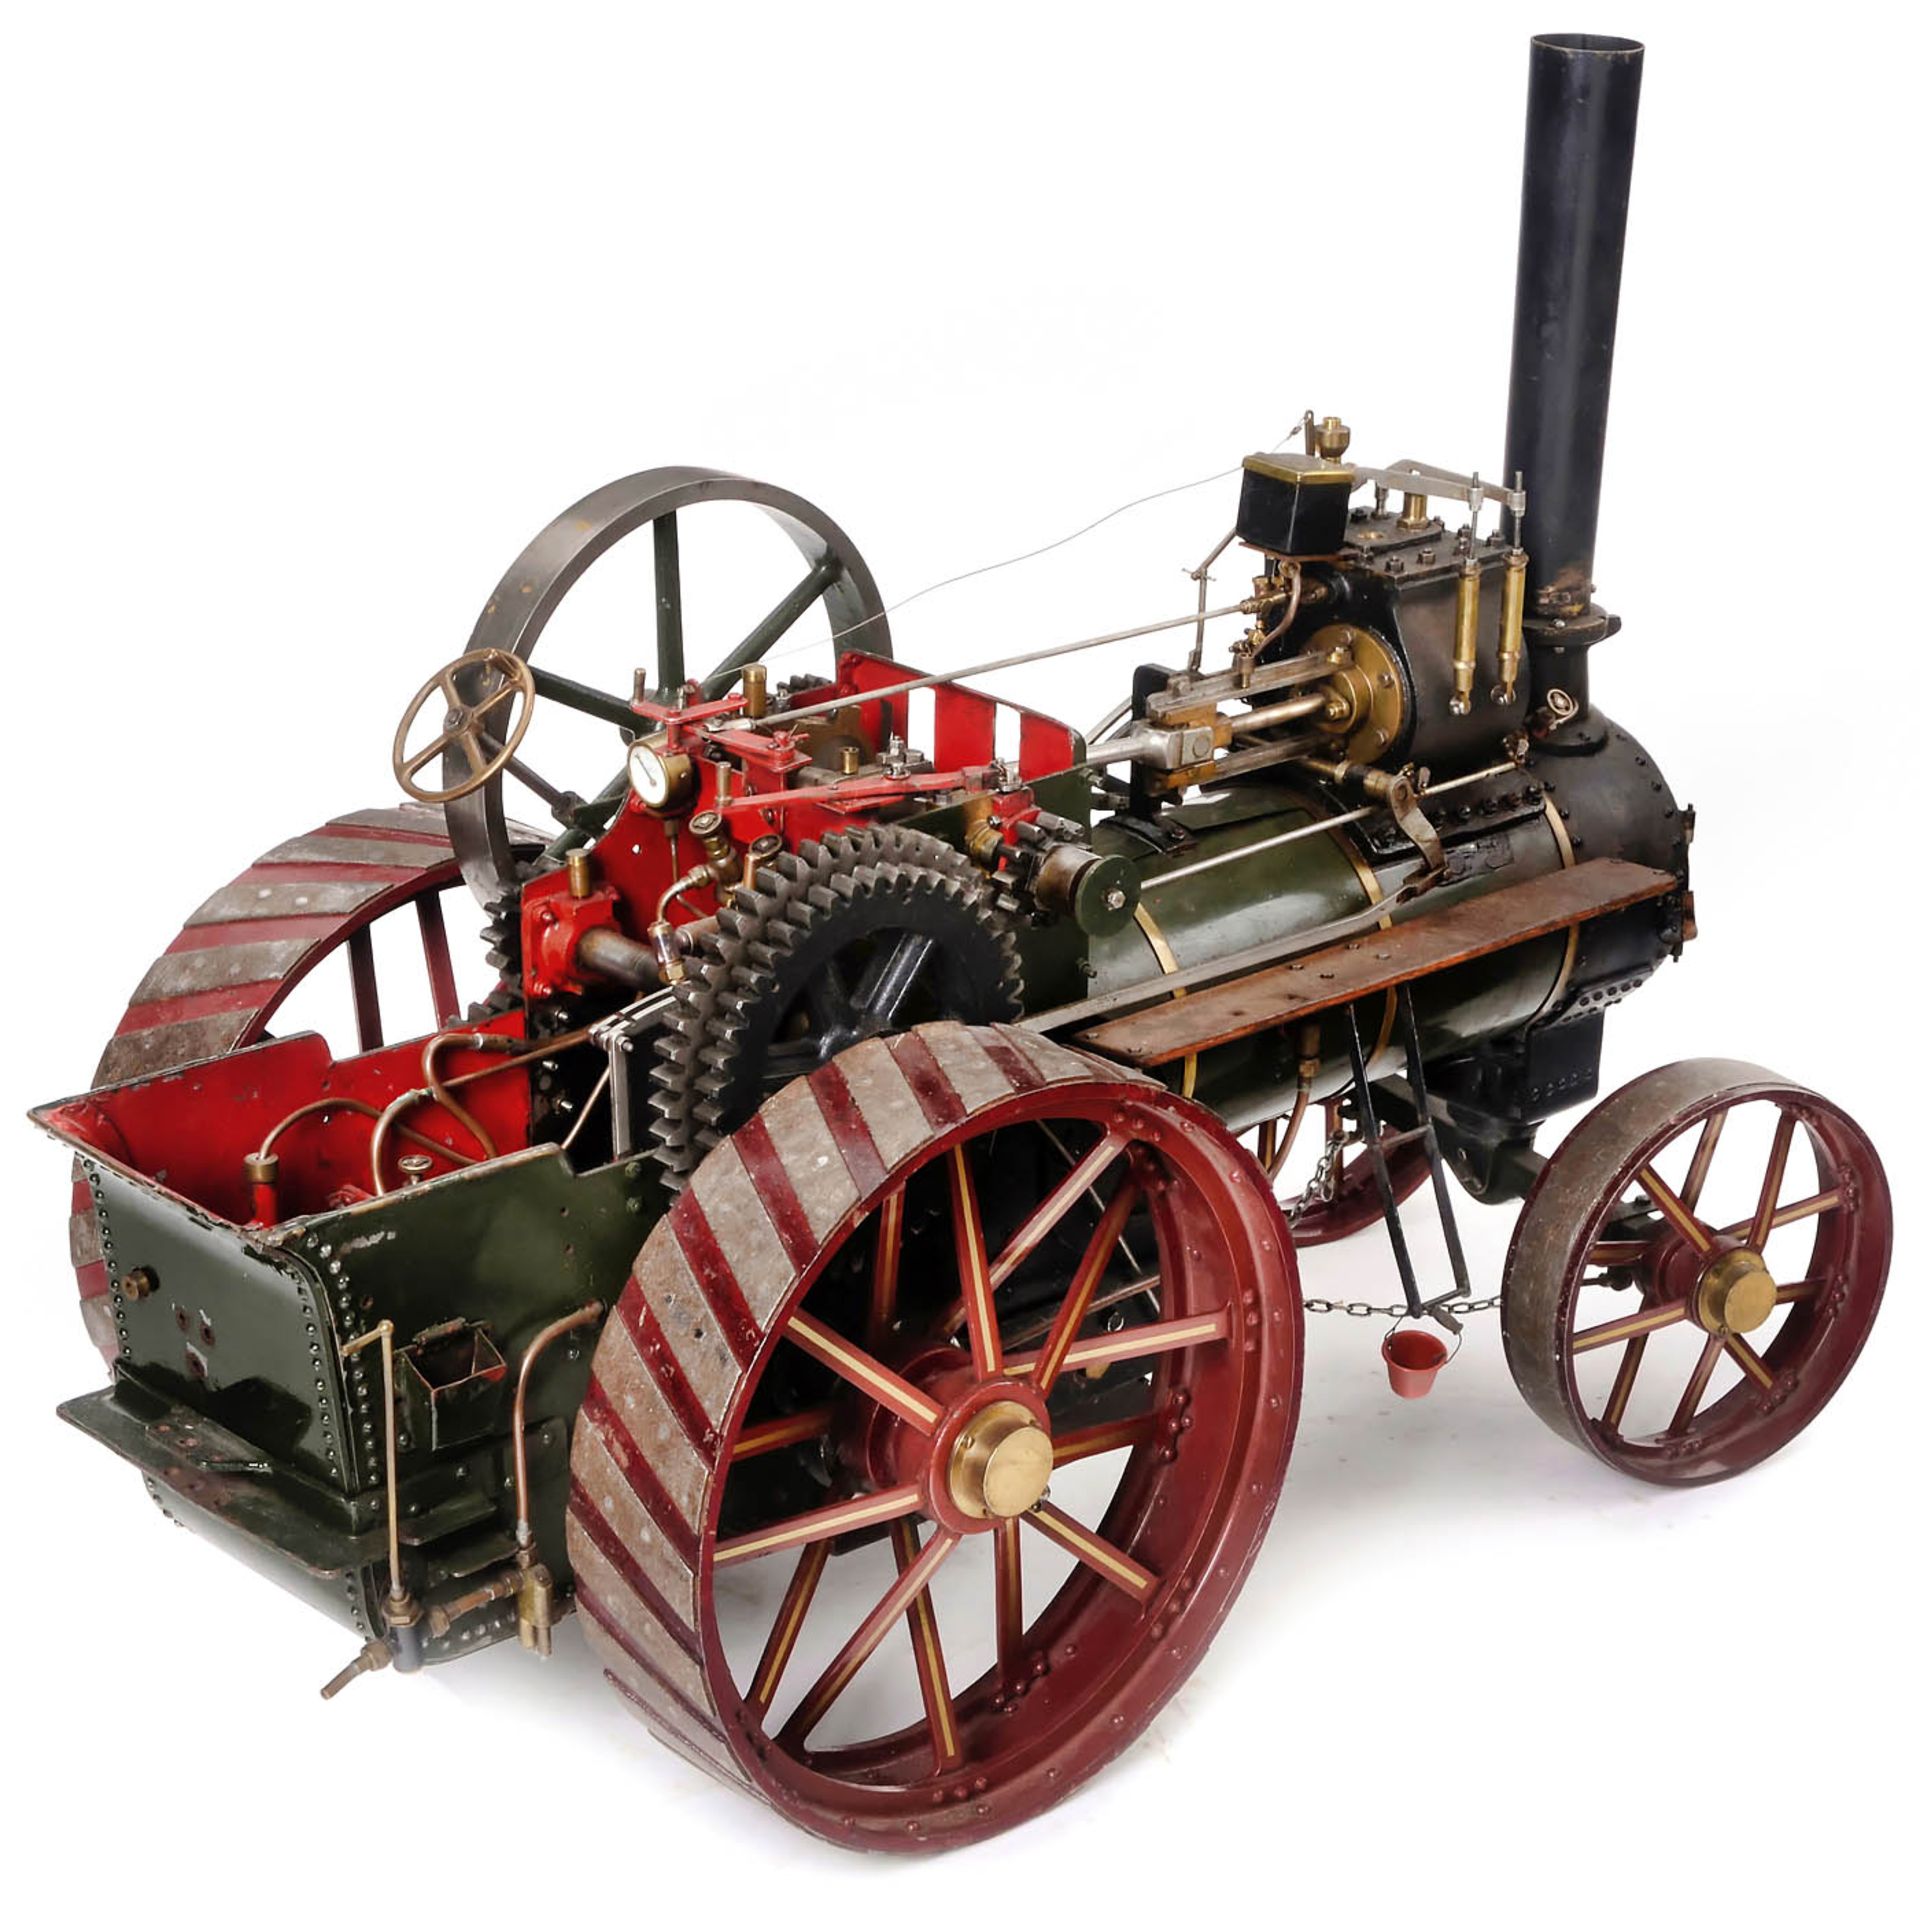 1 ½-Inch Scale Live-Steam Model of a Traction Engine - Bild 3 aus 7